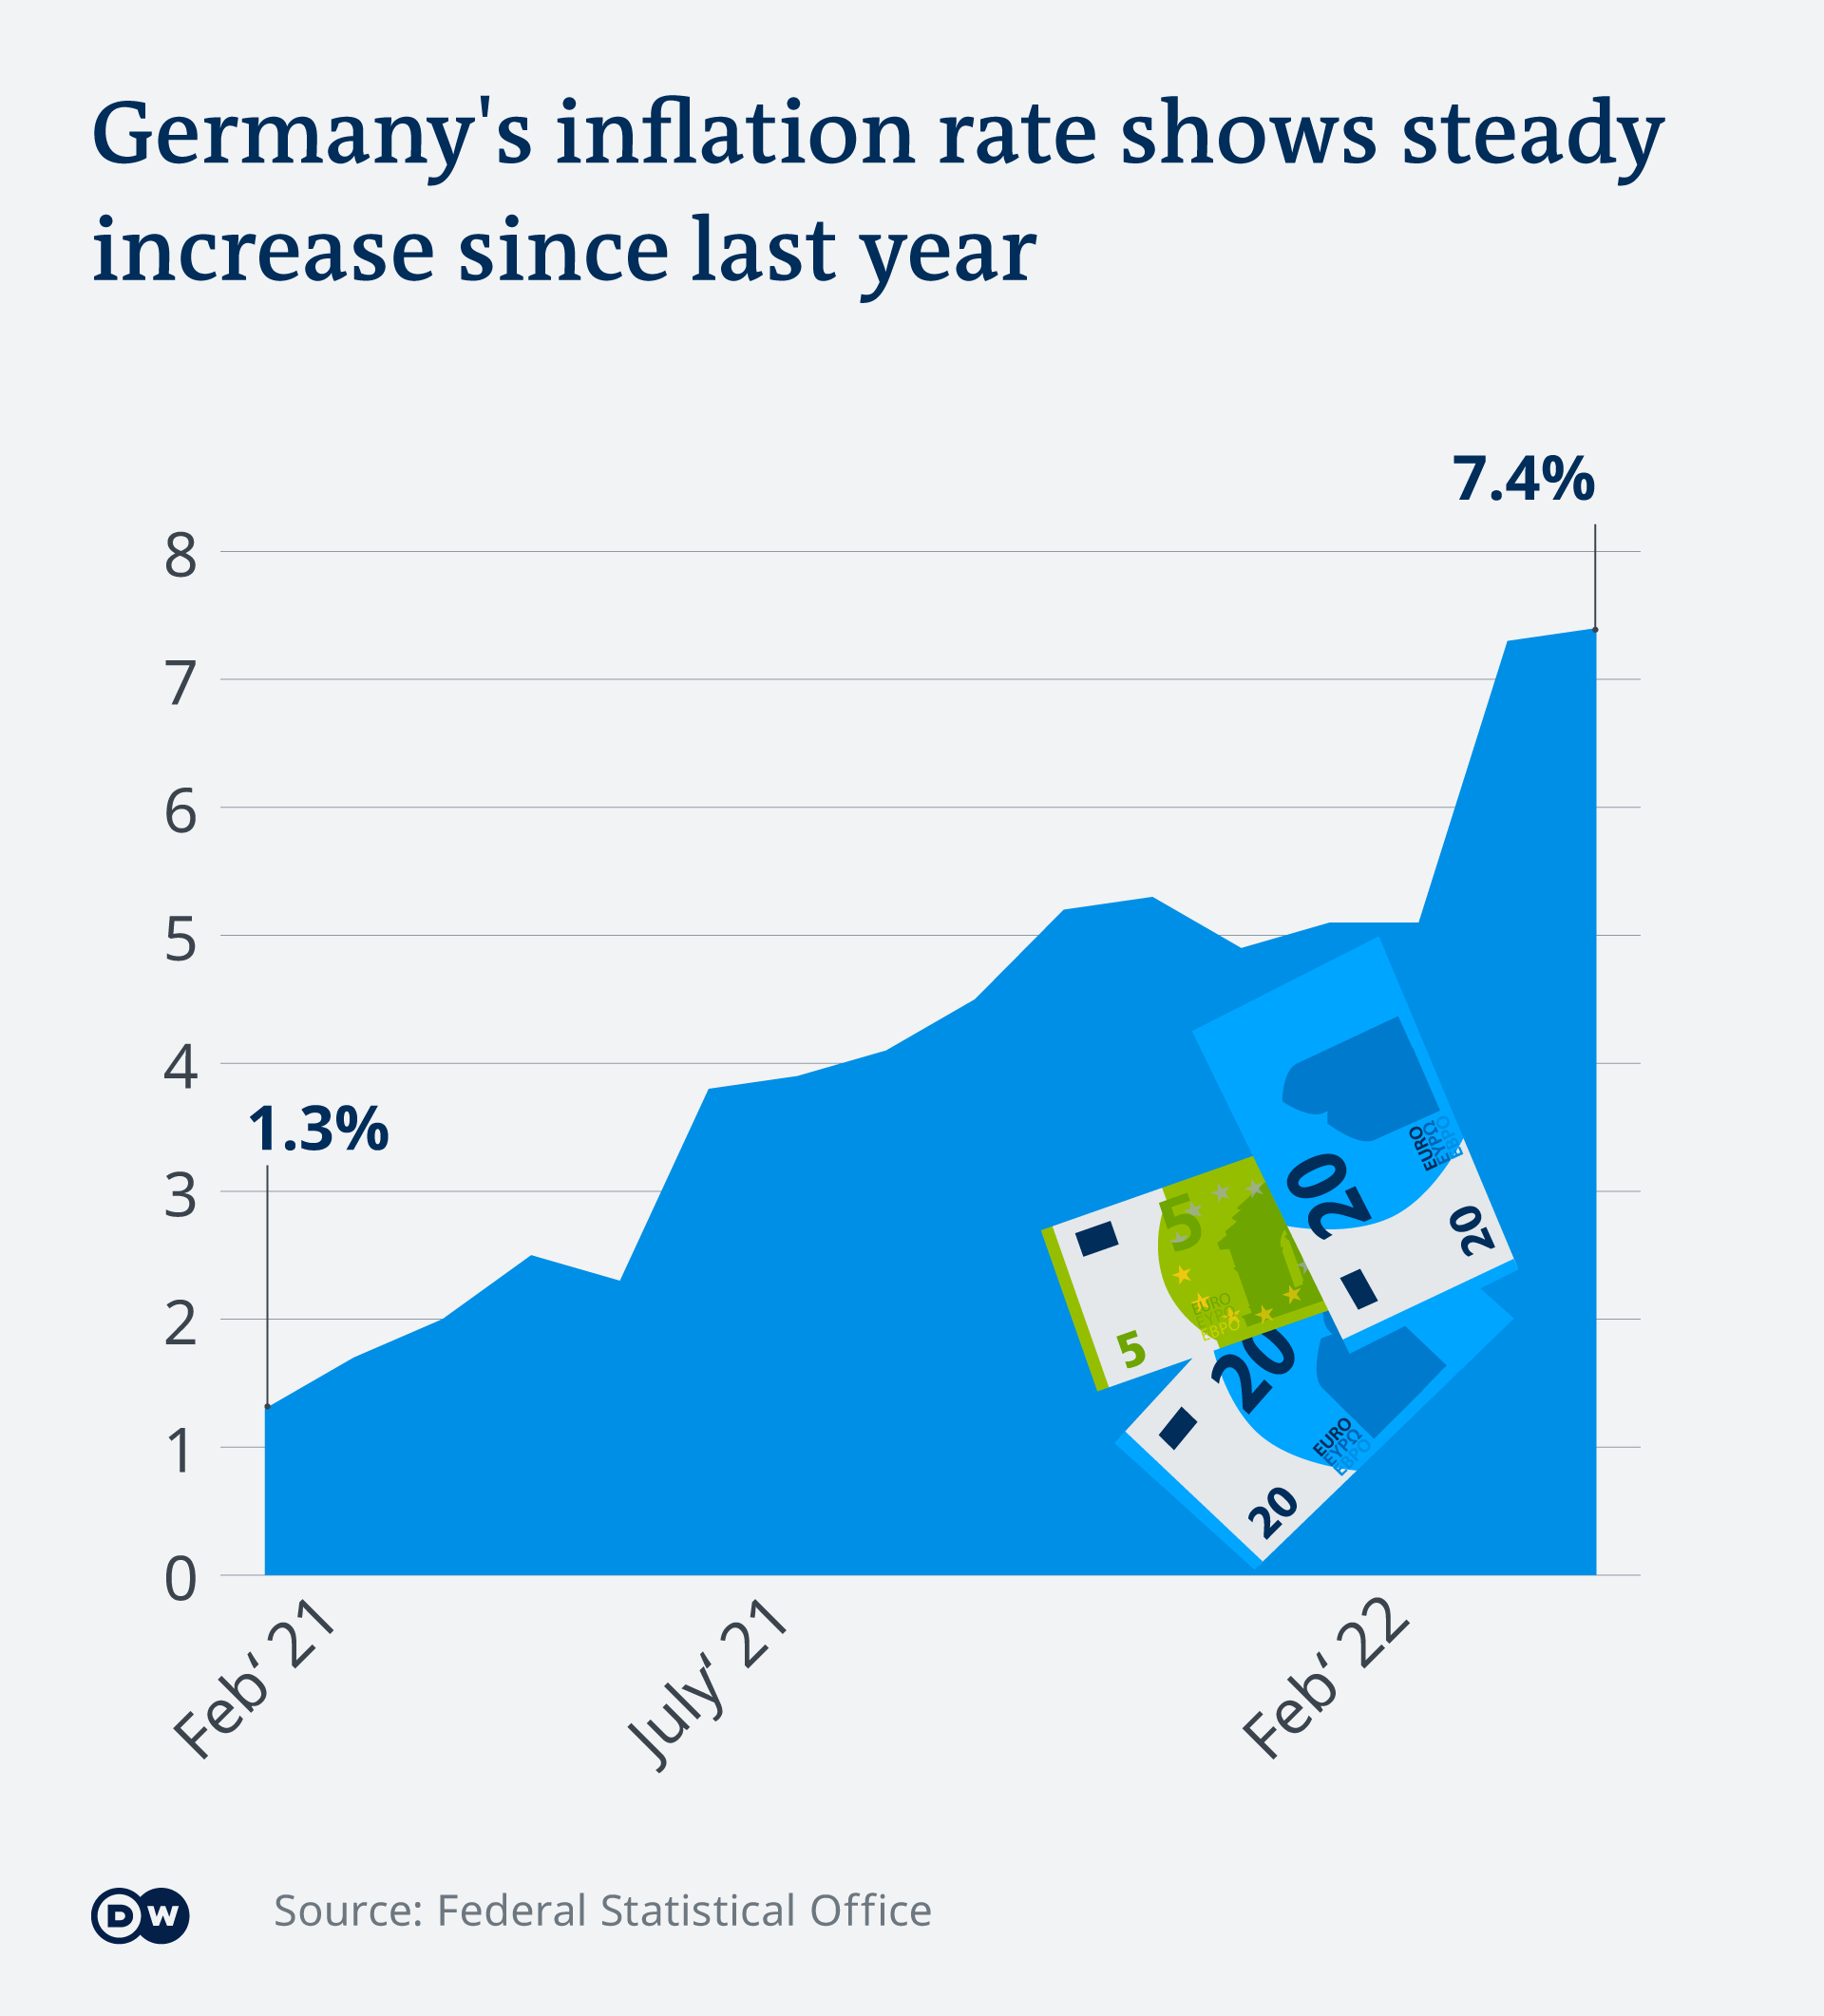 An infographic showing how Germany's inflation rate has climbed from 1.3% in February 2021 to 7.4% a year later